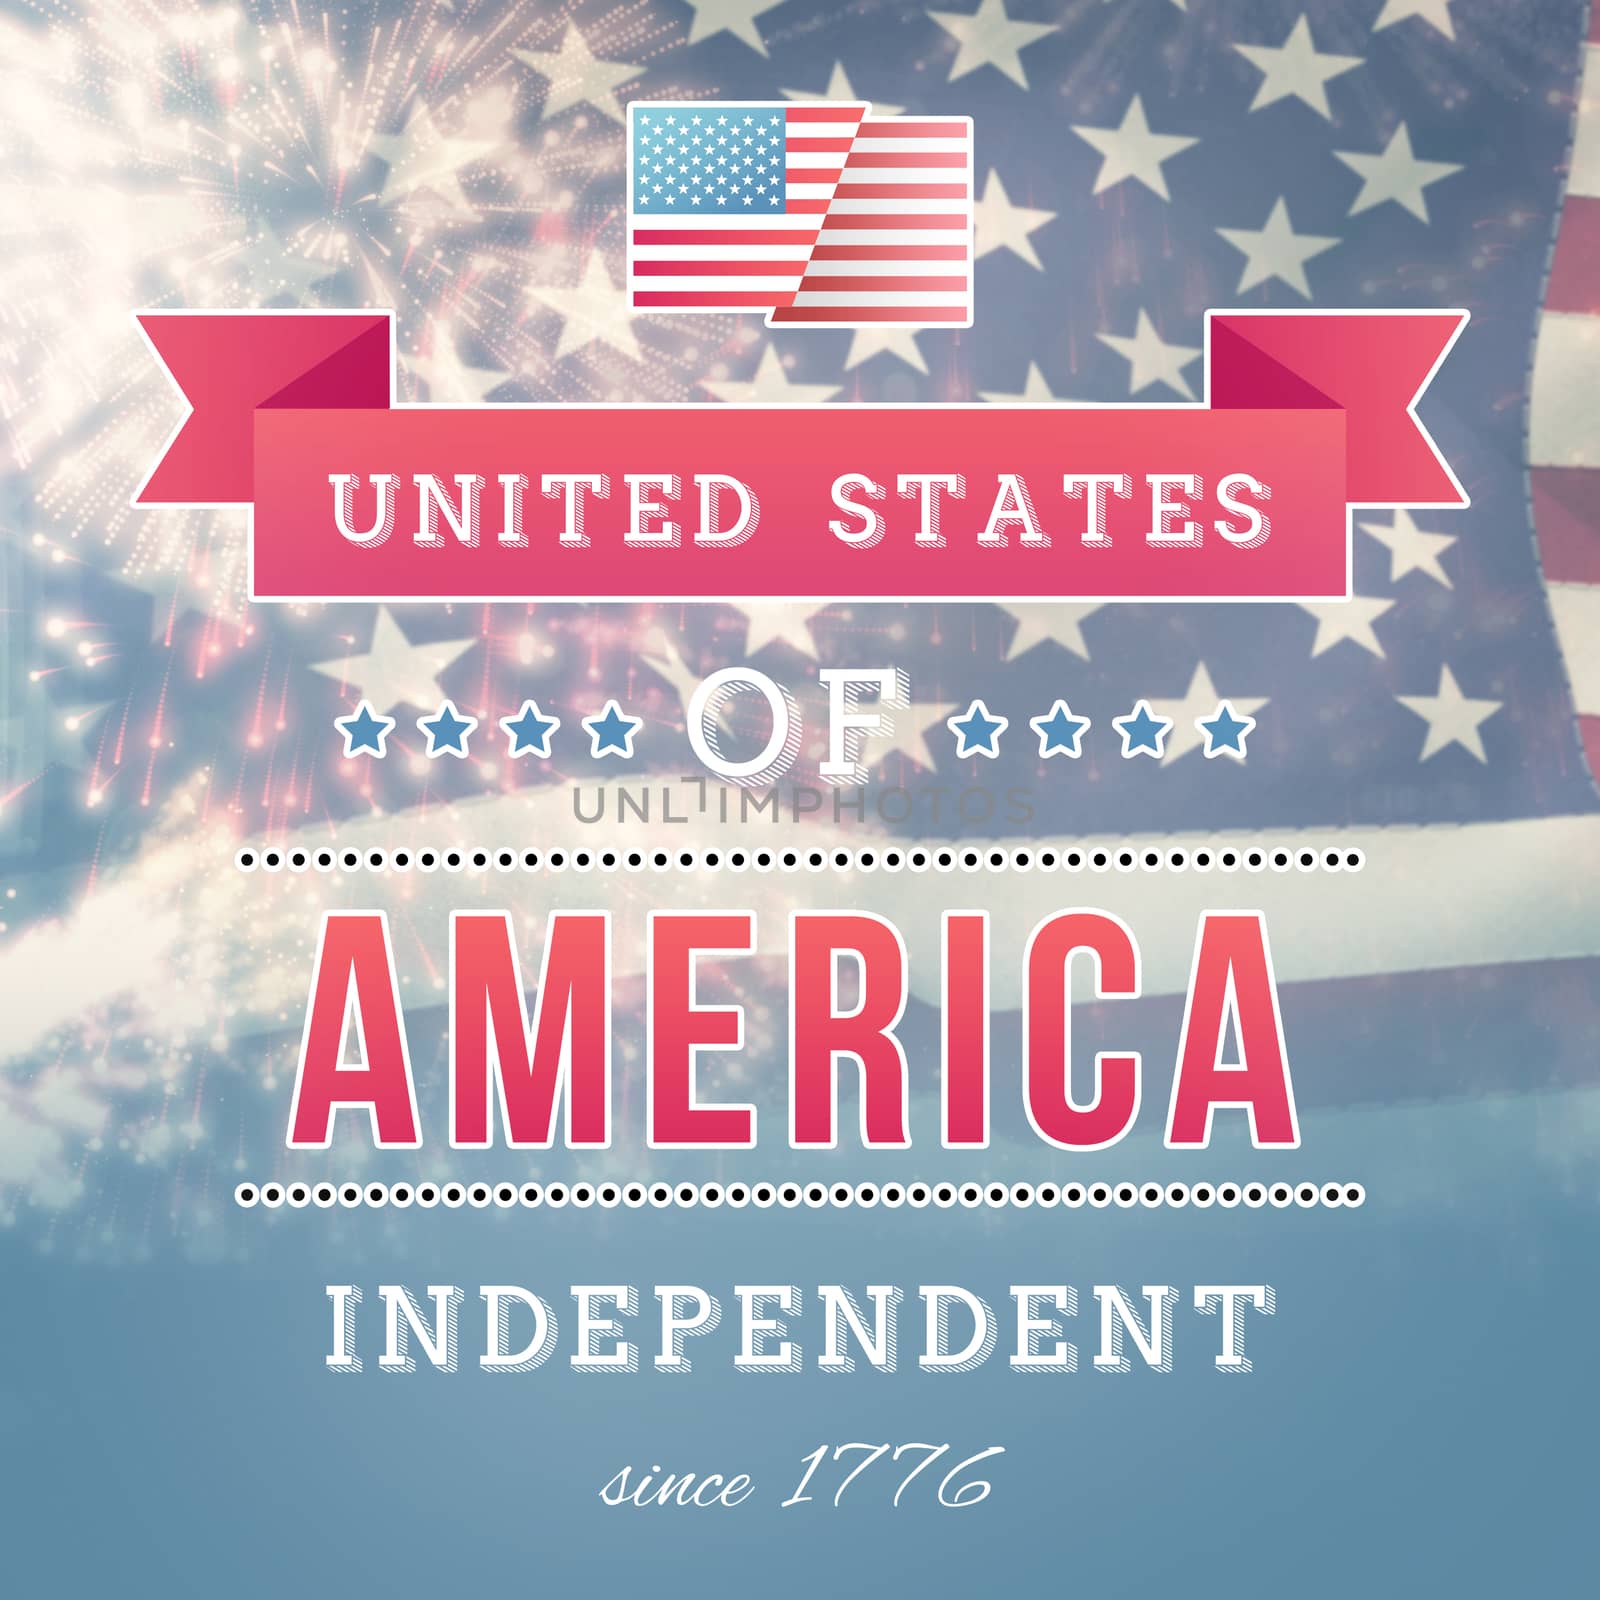 Independence day graphic against united states of america flag